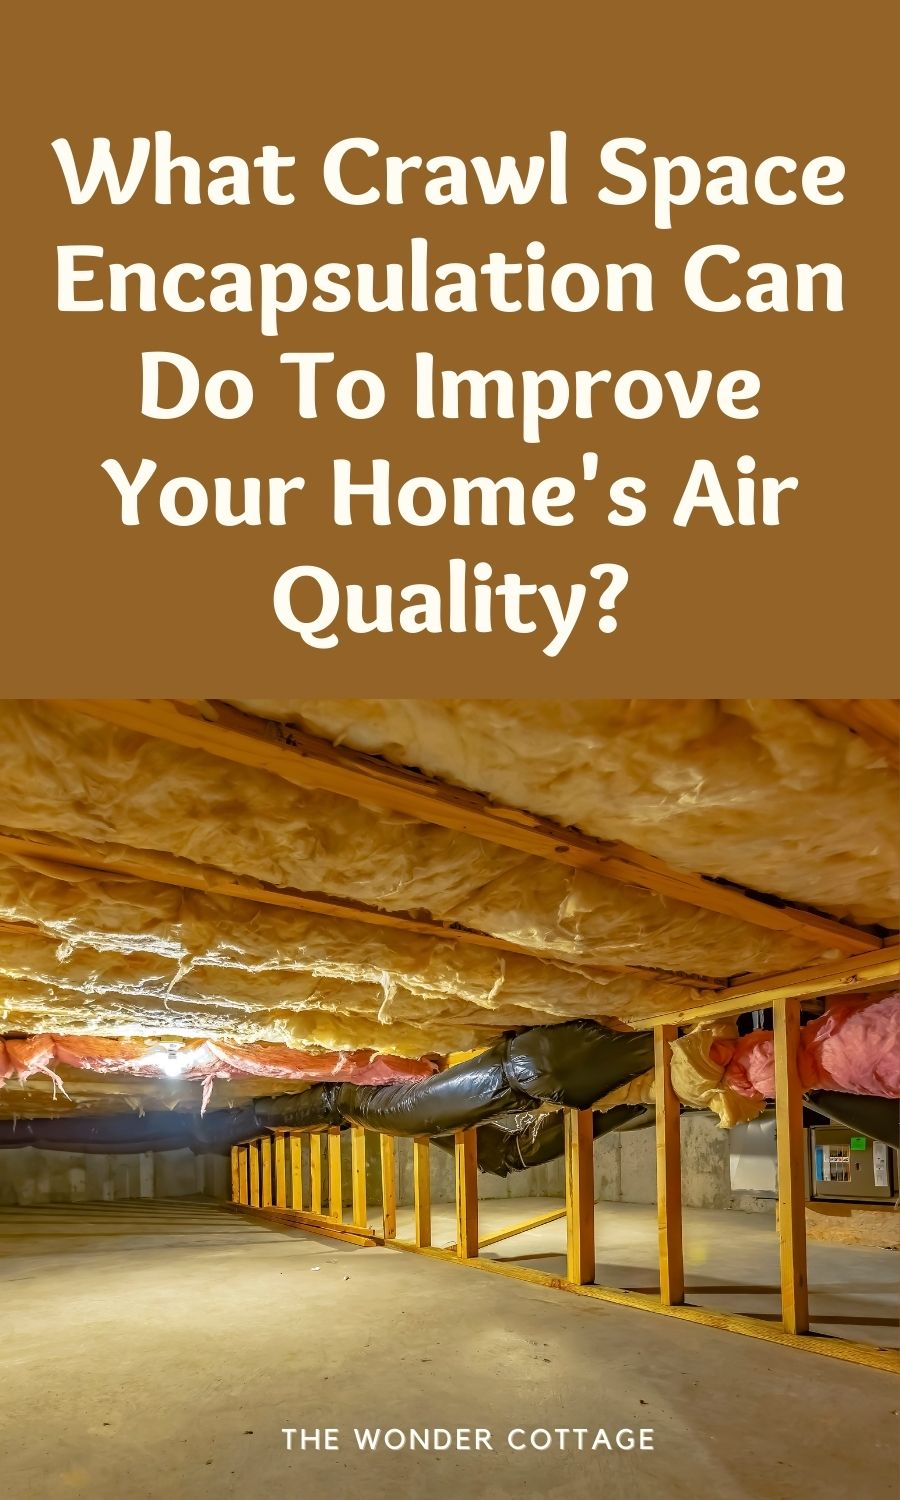 5 ways crawl space encapsulation can improve your home's air quality